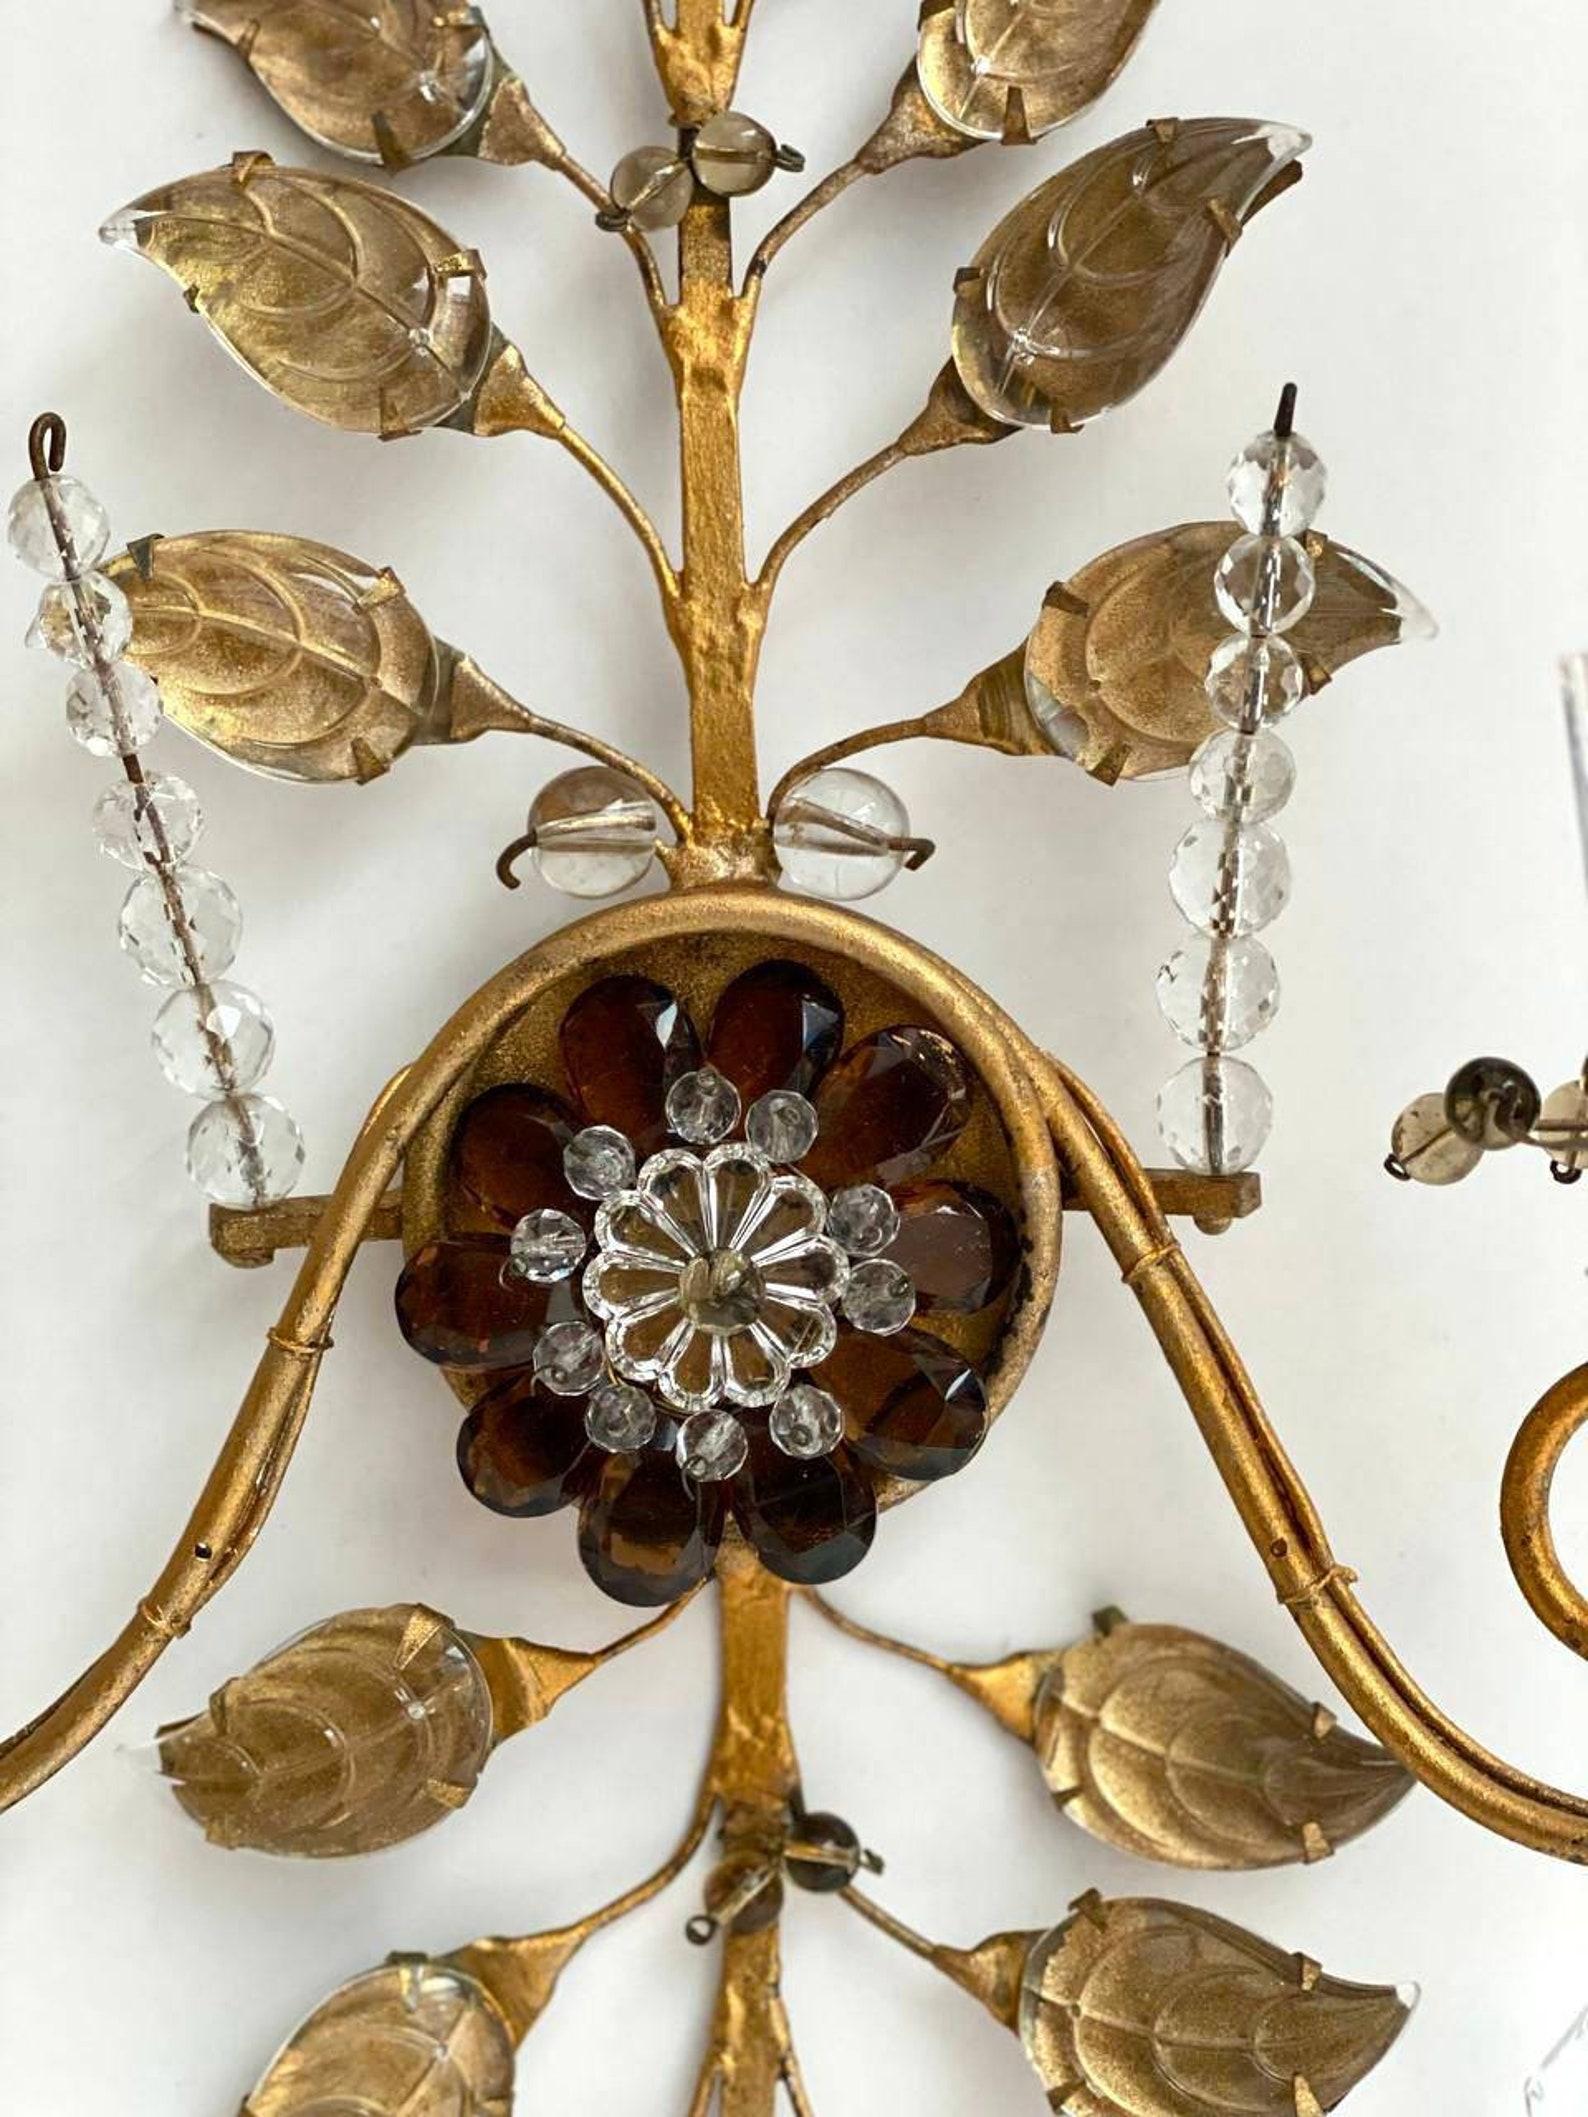 Italian crystal flower and metal wall sconce by Banci Florence, Italy, 1960s. 

A wonderful vintage floral sconce by Banci Firenze with crystal flowers and leaves. 

The wall light has a beautiful patina and gives each room an eclectic